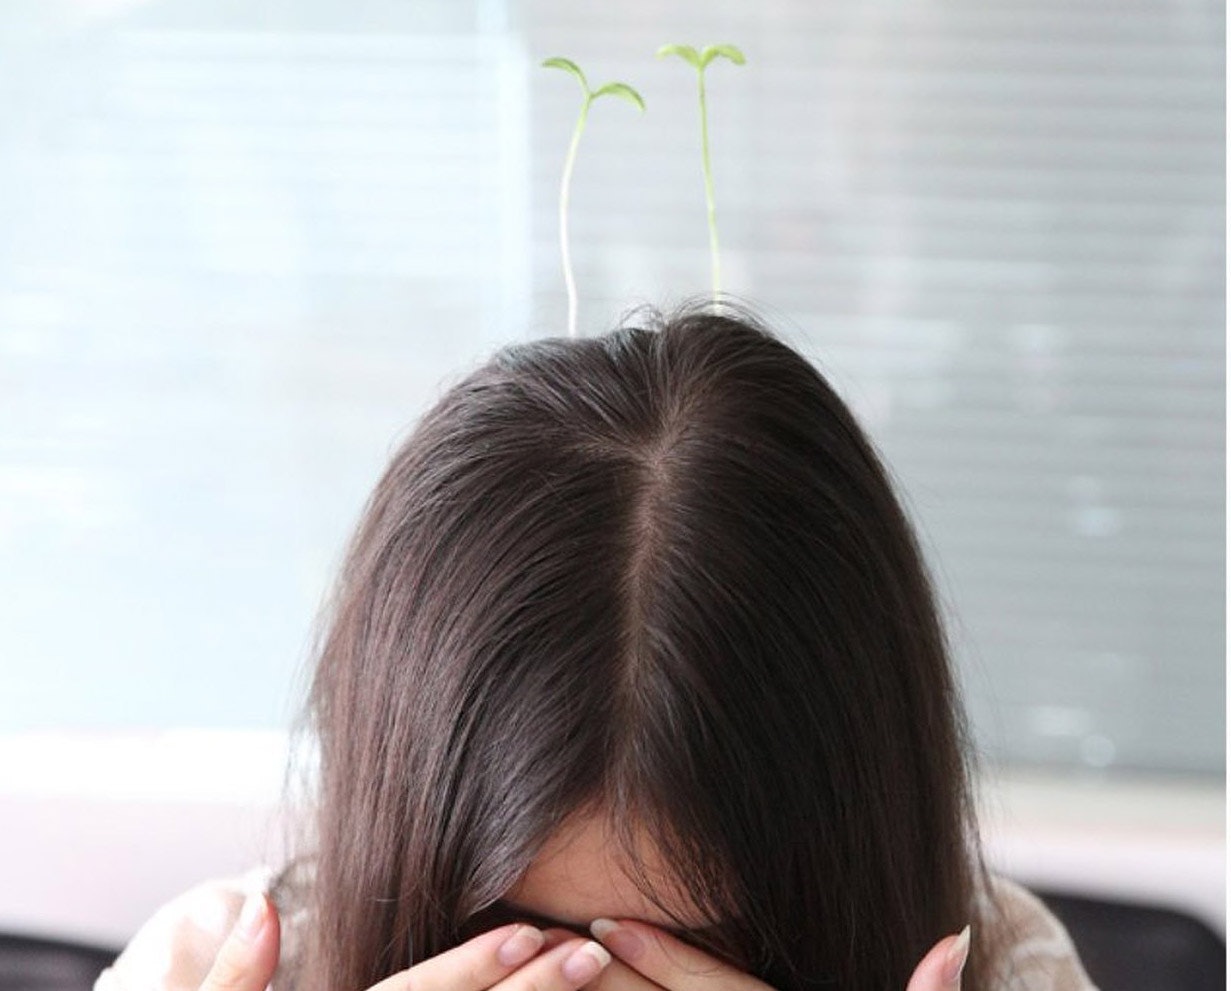 chinese bean sprout hair clip